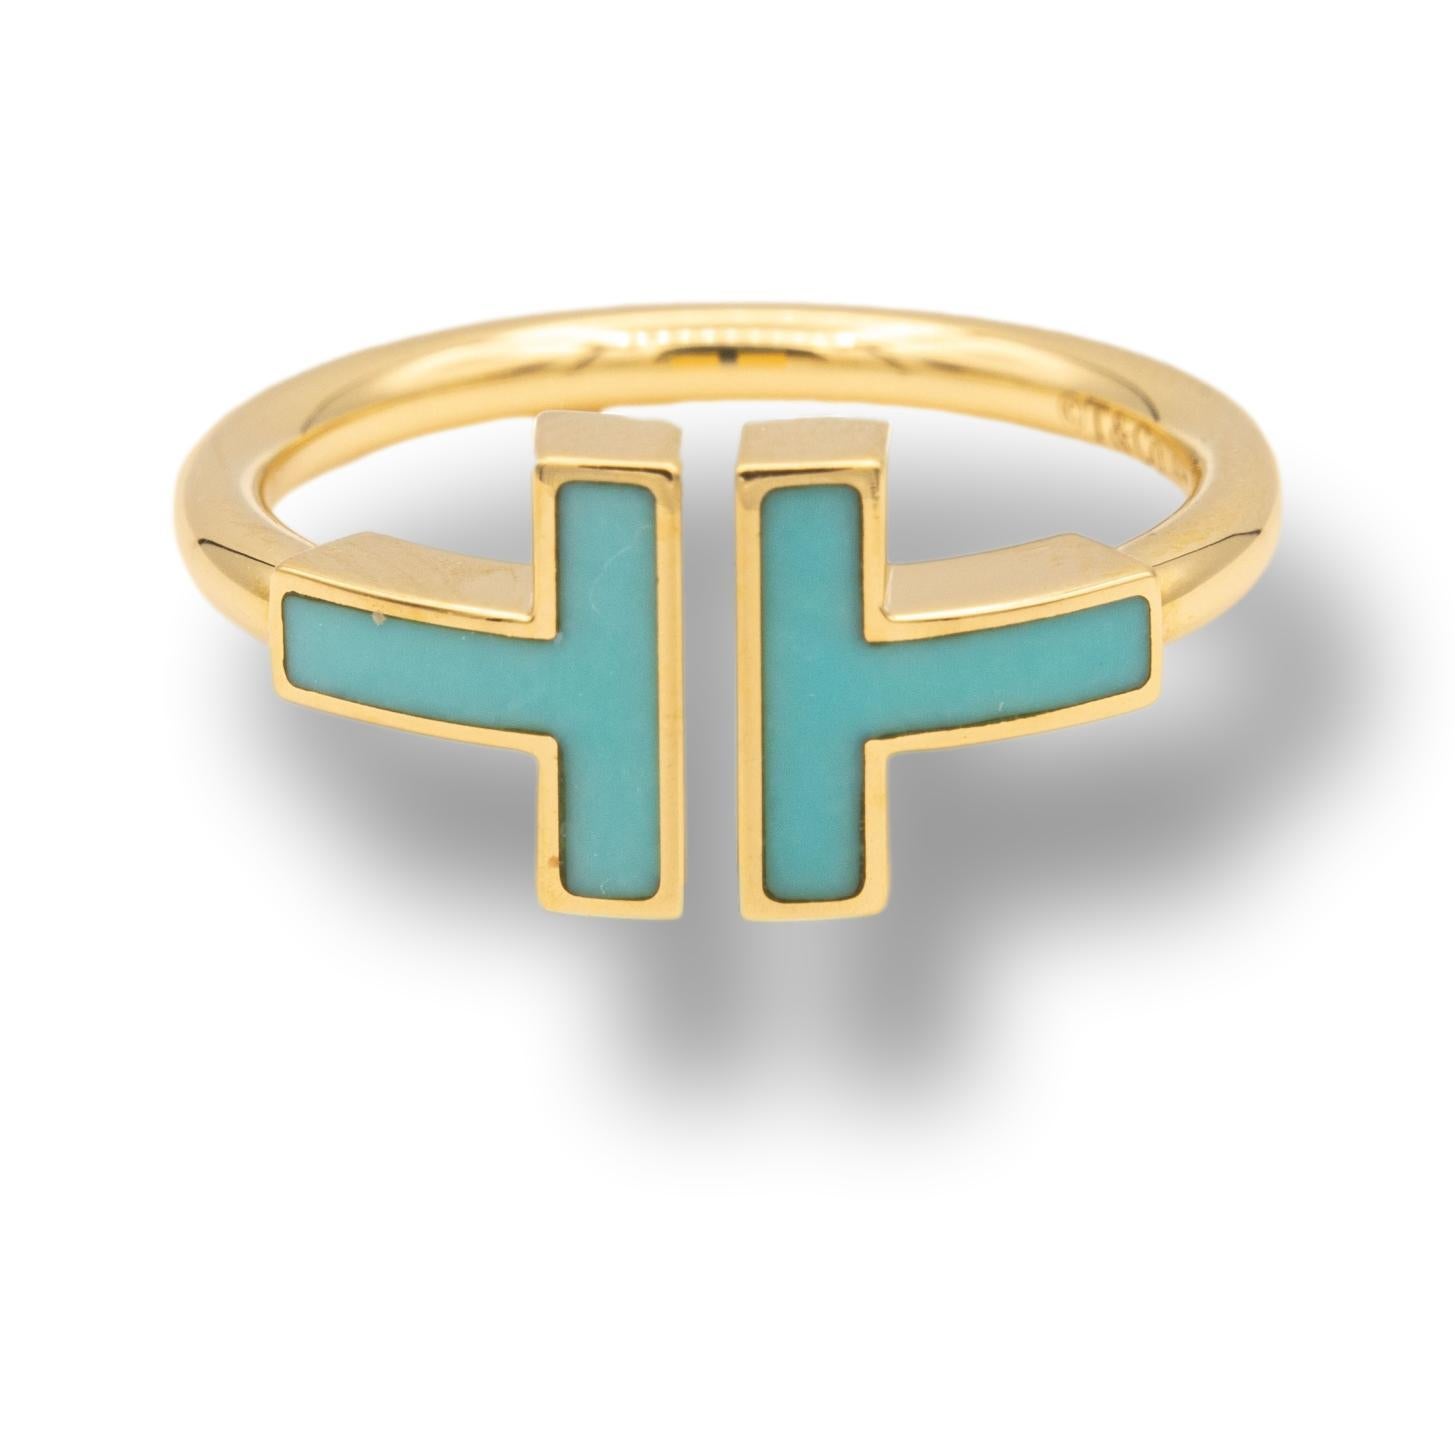 Tiffany & Co. wire ring from the Tiffany T collection finely crafted in 18 karat yellow gold with an open Turquoise Double 